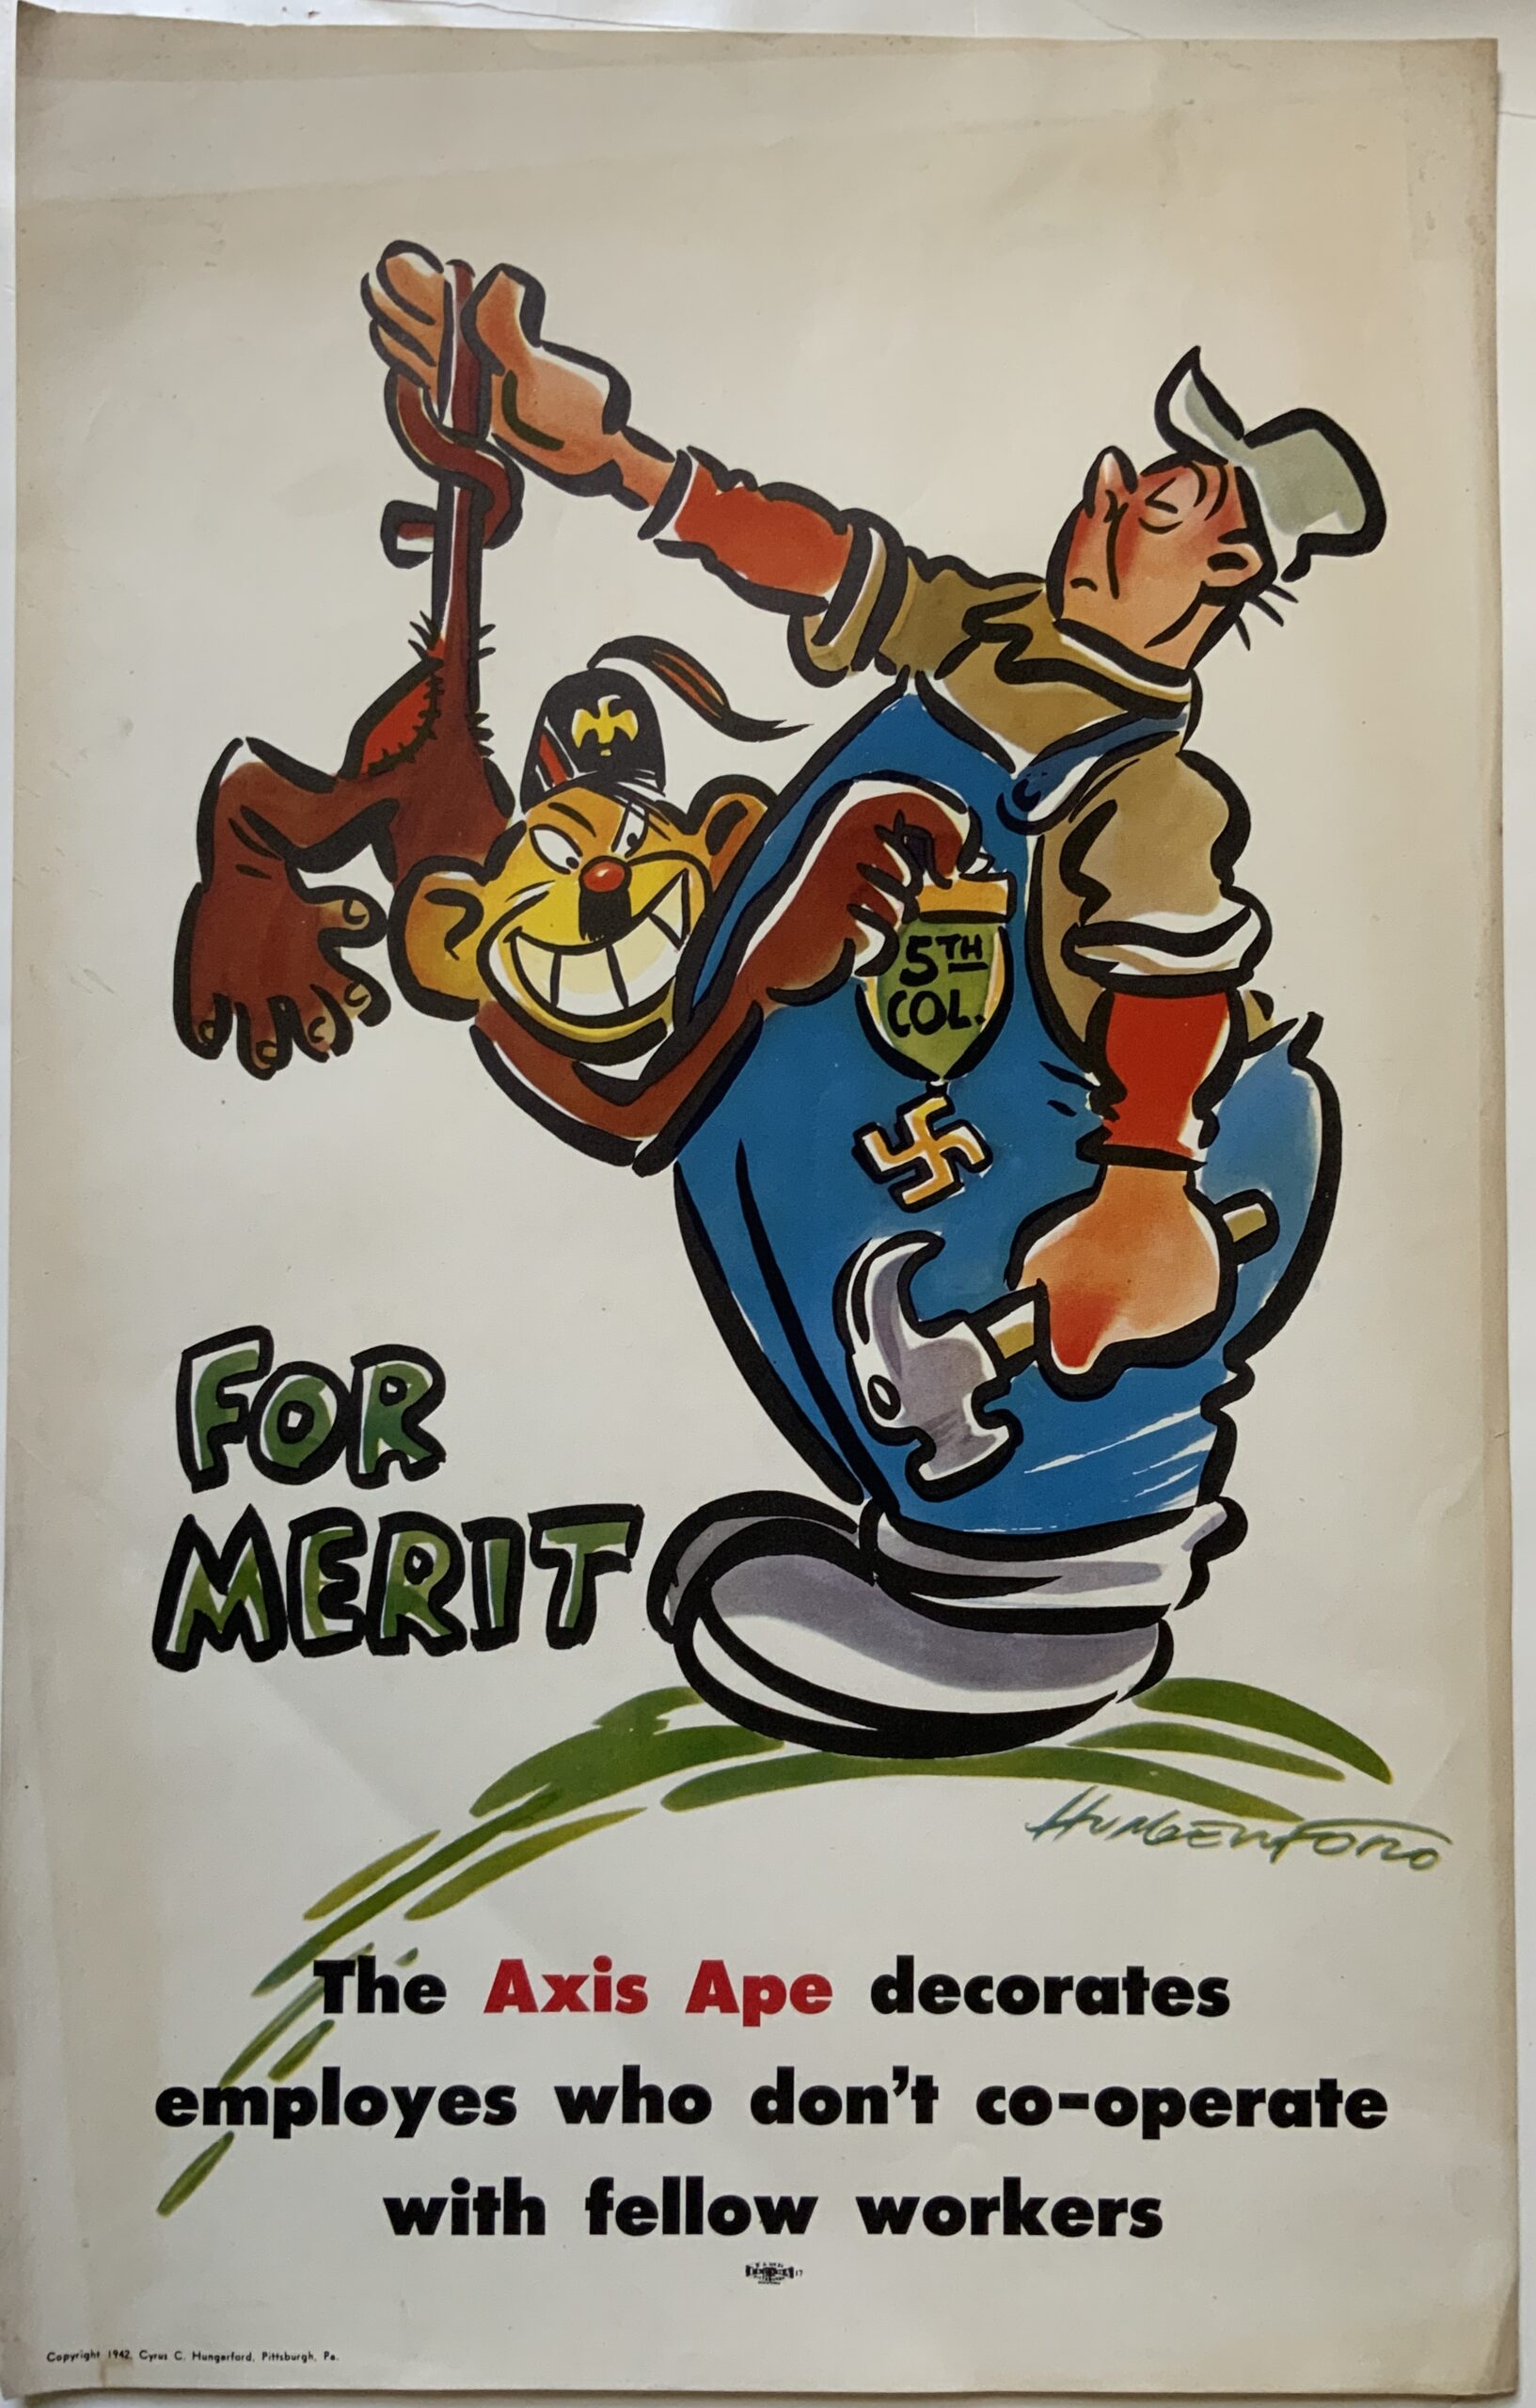 M115	WORLD WAR II: FOR MERIT	- “THIS AXIS APE DECORATES EMPLOYEES WHO DON’T CO-OPERATE WITH FELLOW WORKERS”